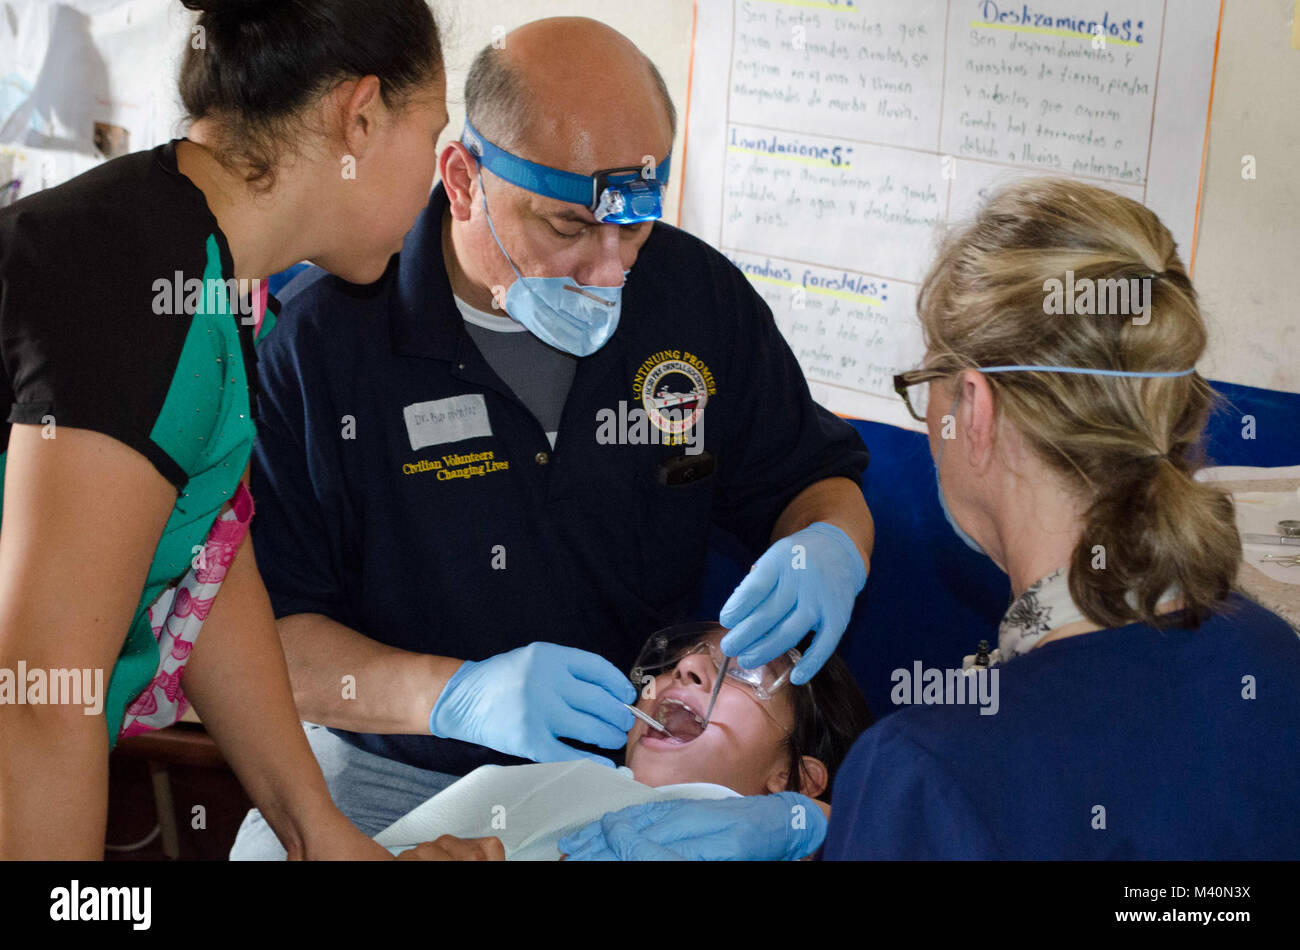 150618-N-KA456-019 SAN JULIAN, El Salvador (June 18, 2015) - A dental assistant with the non-governmental organization (NGO) University of California San Diego Pre-Dental Society (UCSD PDS) and a Salvadoran dentist perform a dental procedure on a patient at a medical site established at Centro Escolar Doctor Eduardo Enrique Barrientos during Continuing Promise 2015 (CP-15). UCSD PDS volunteers are working alongside other NGOs and U.S. and partner nation military members during. Continuing Promise is a U.S. Southern Command-sponsored and U.S. Naval Forces Southern Command/U.S. 4th Fleet-conduct Stock Photo